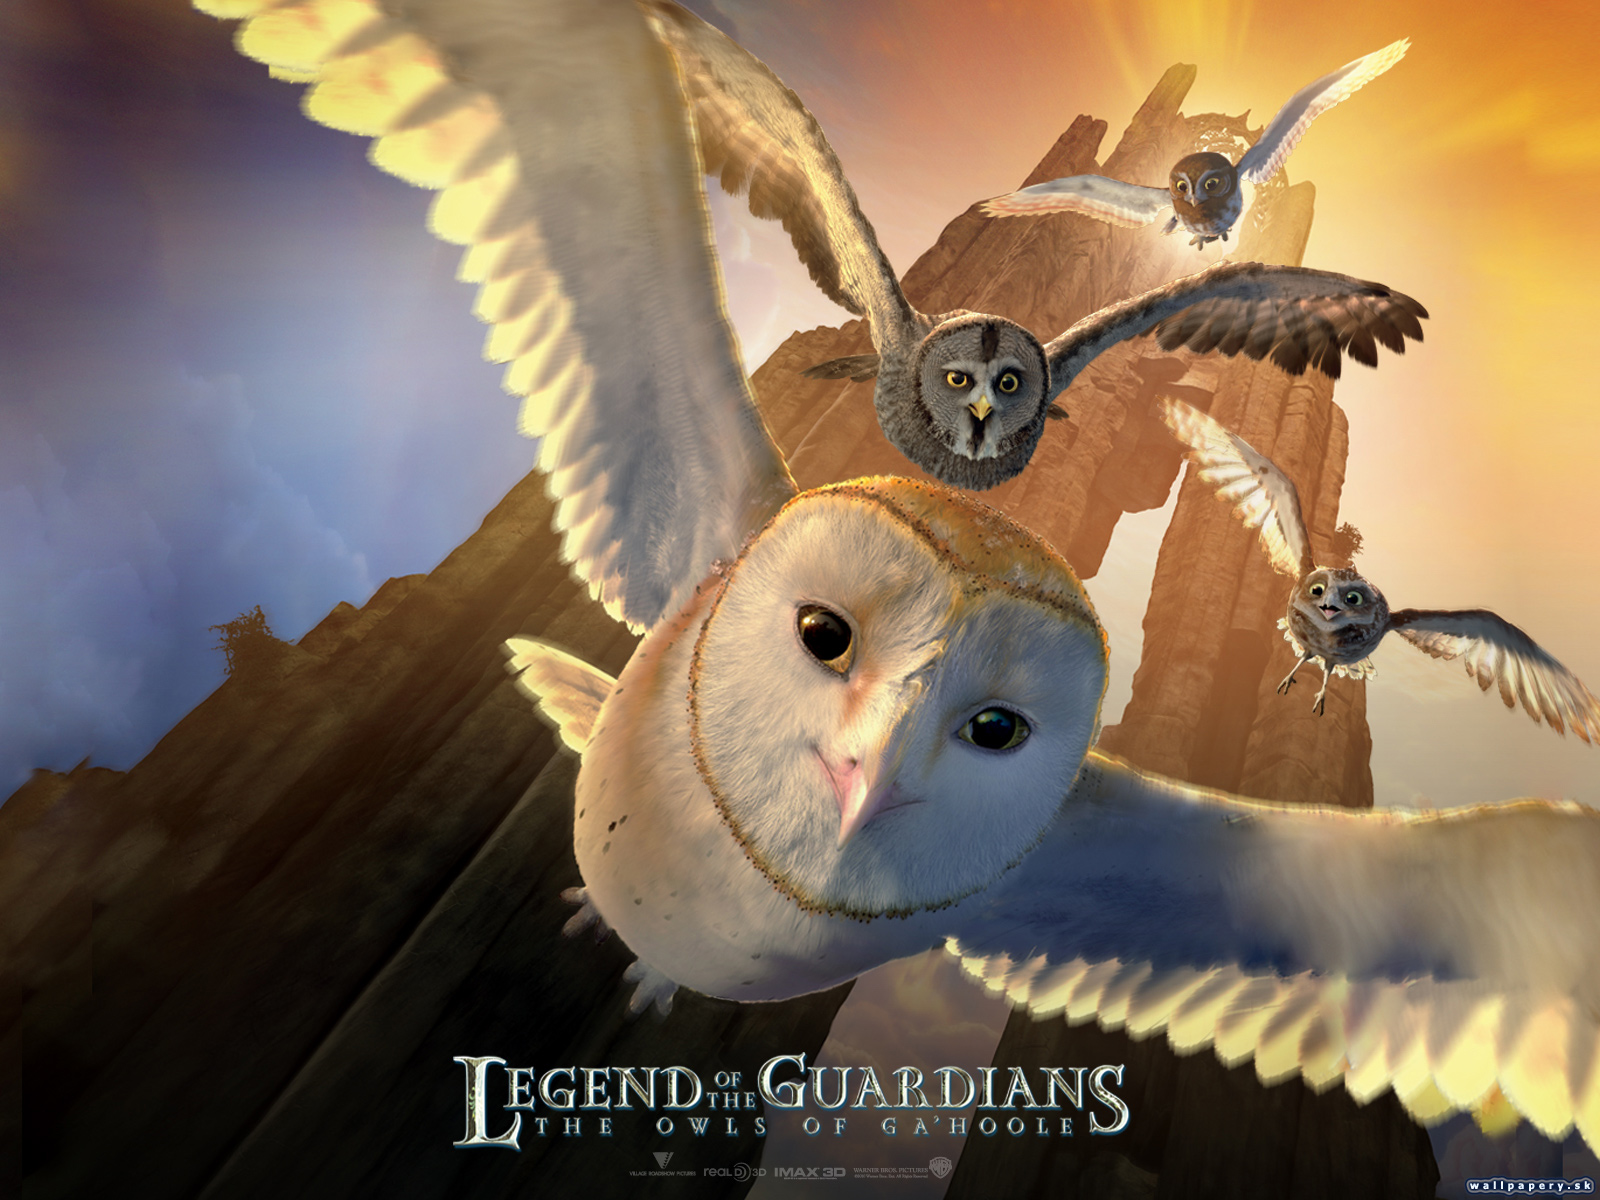 Legend of the Guardians: The Owls of Ga'Hoole - wallpaper 7